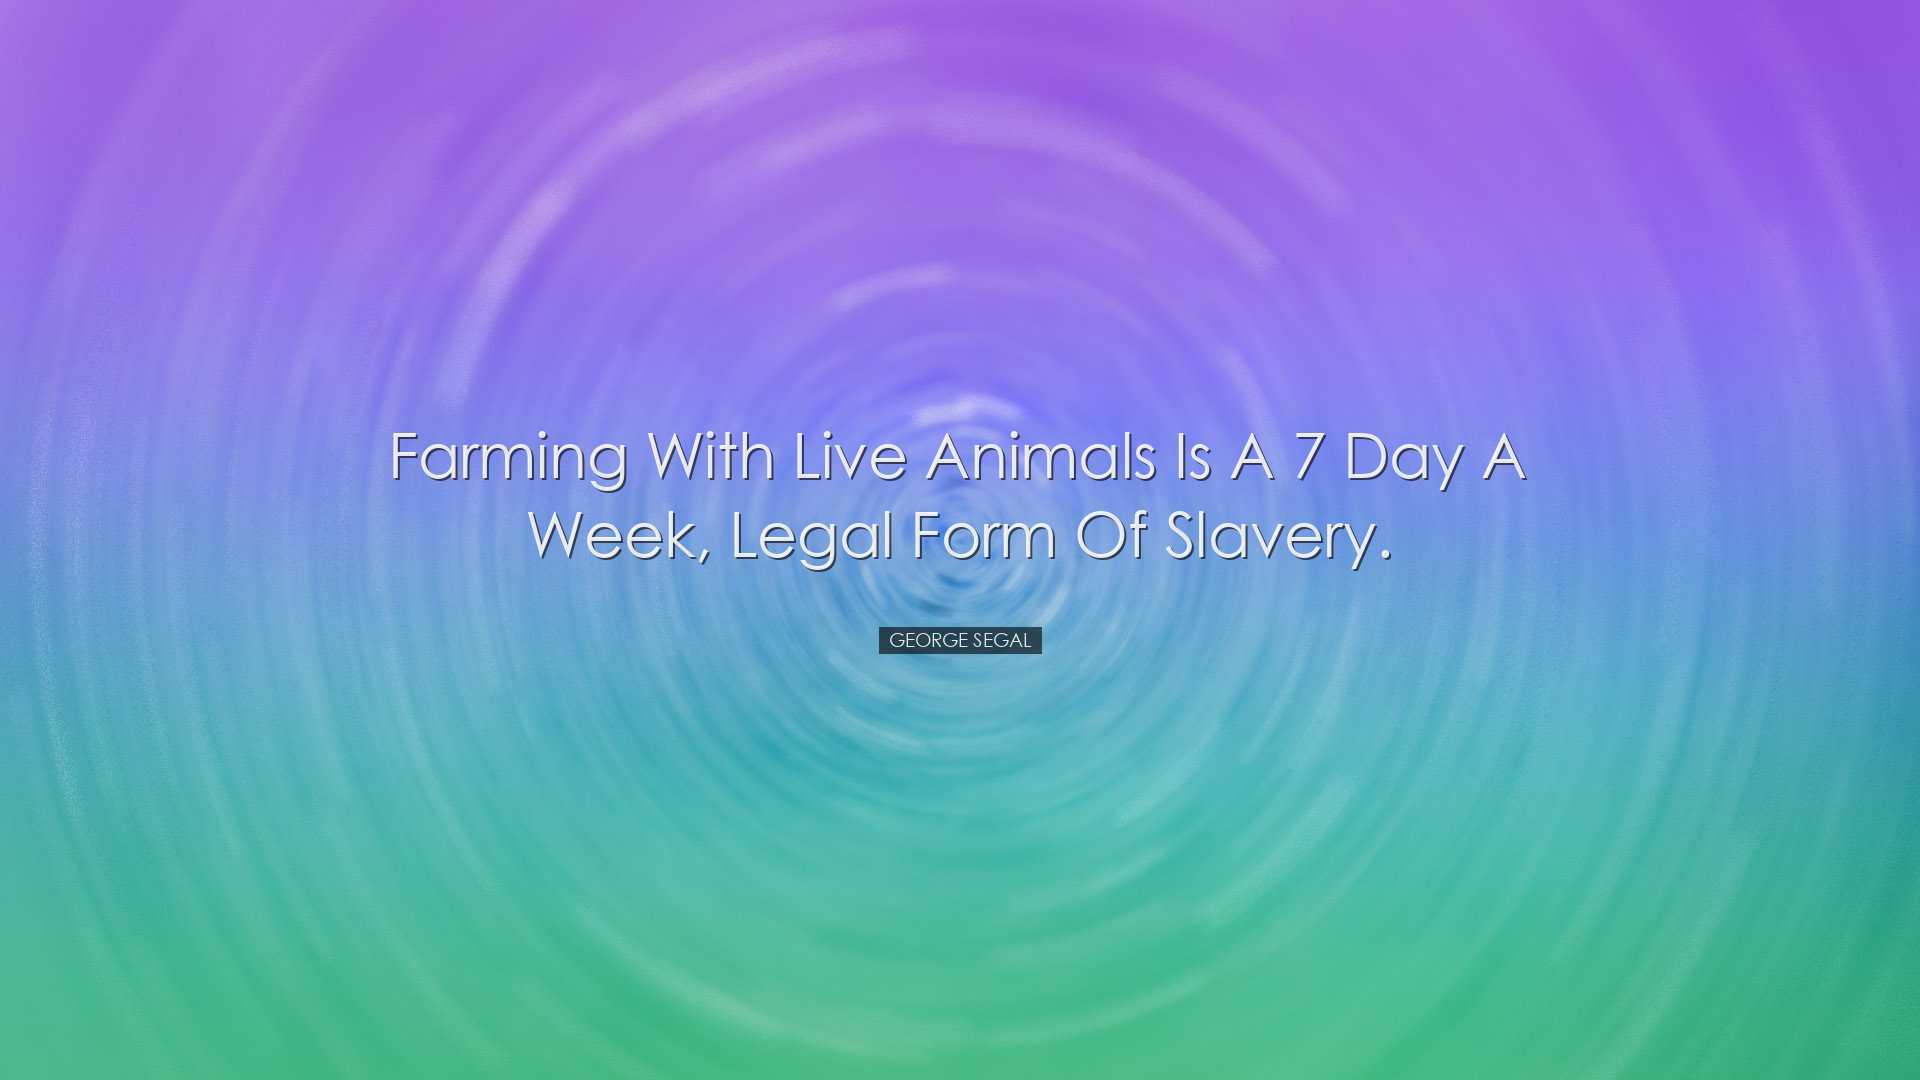 Farming with live animals is a 7 day a week, legal form of slavery